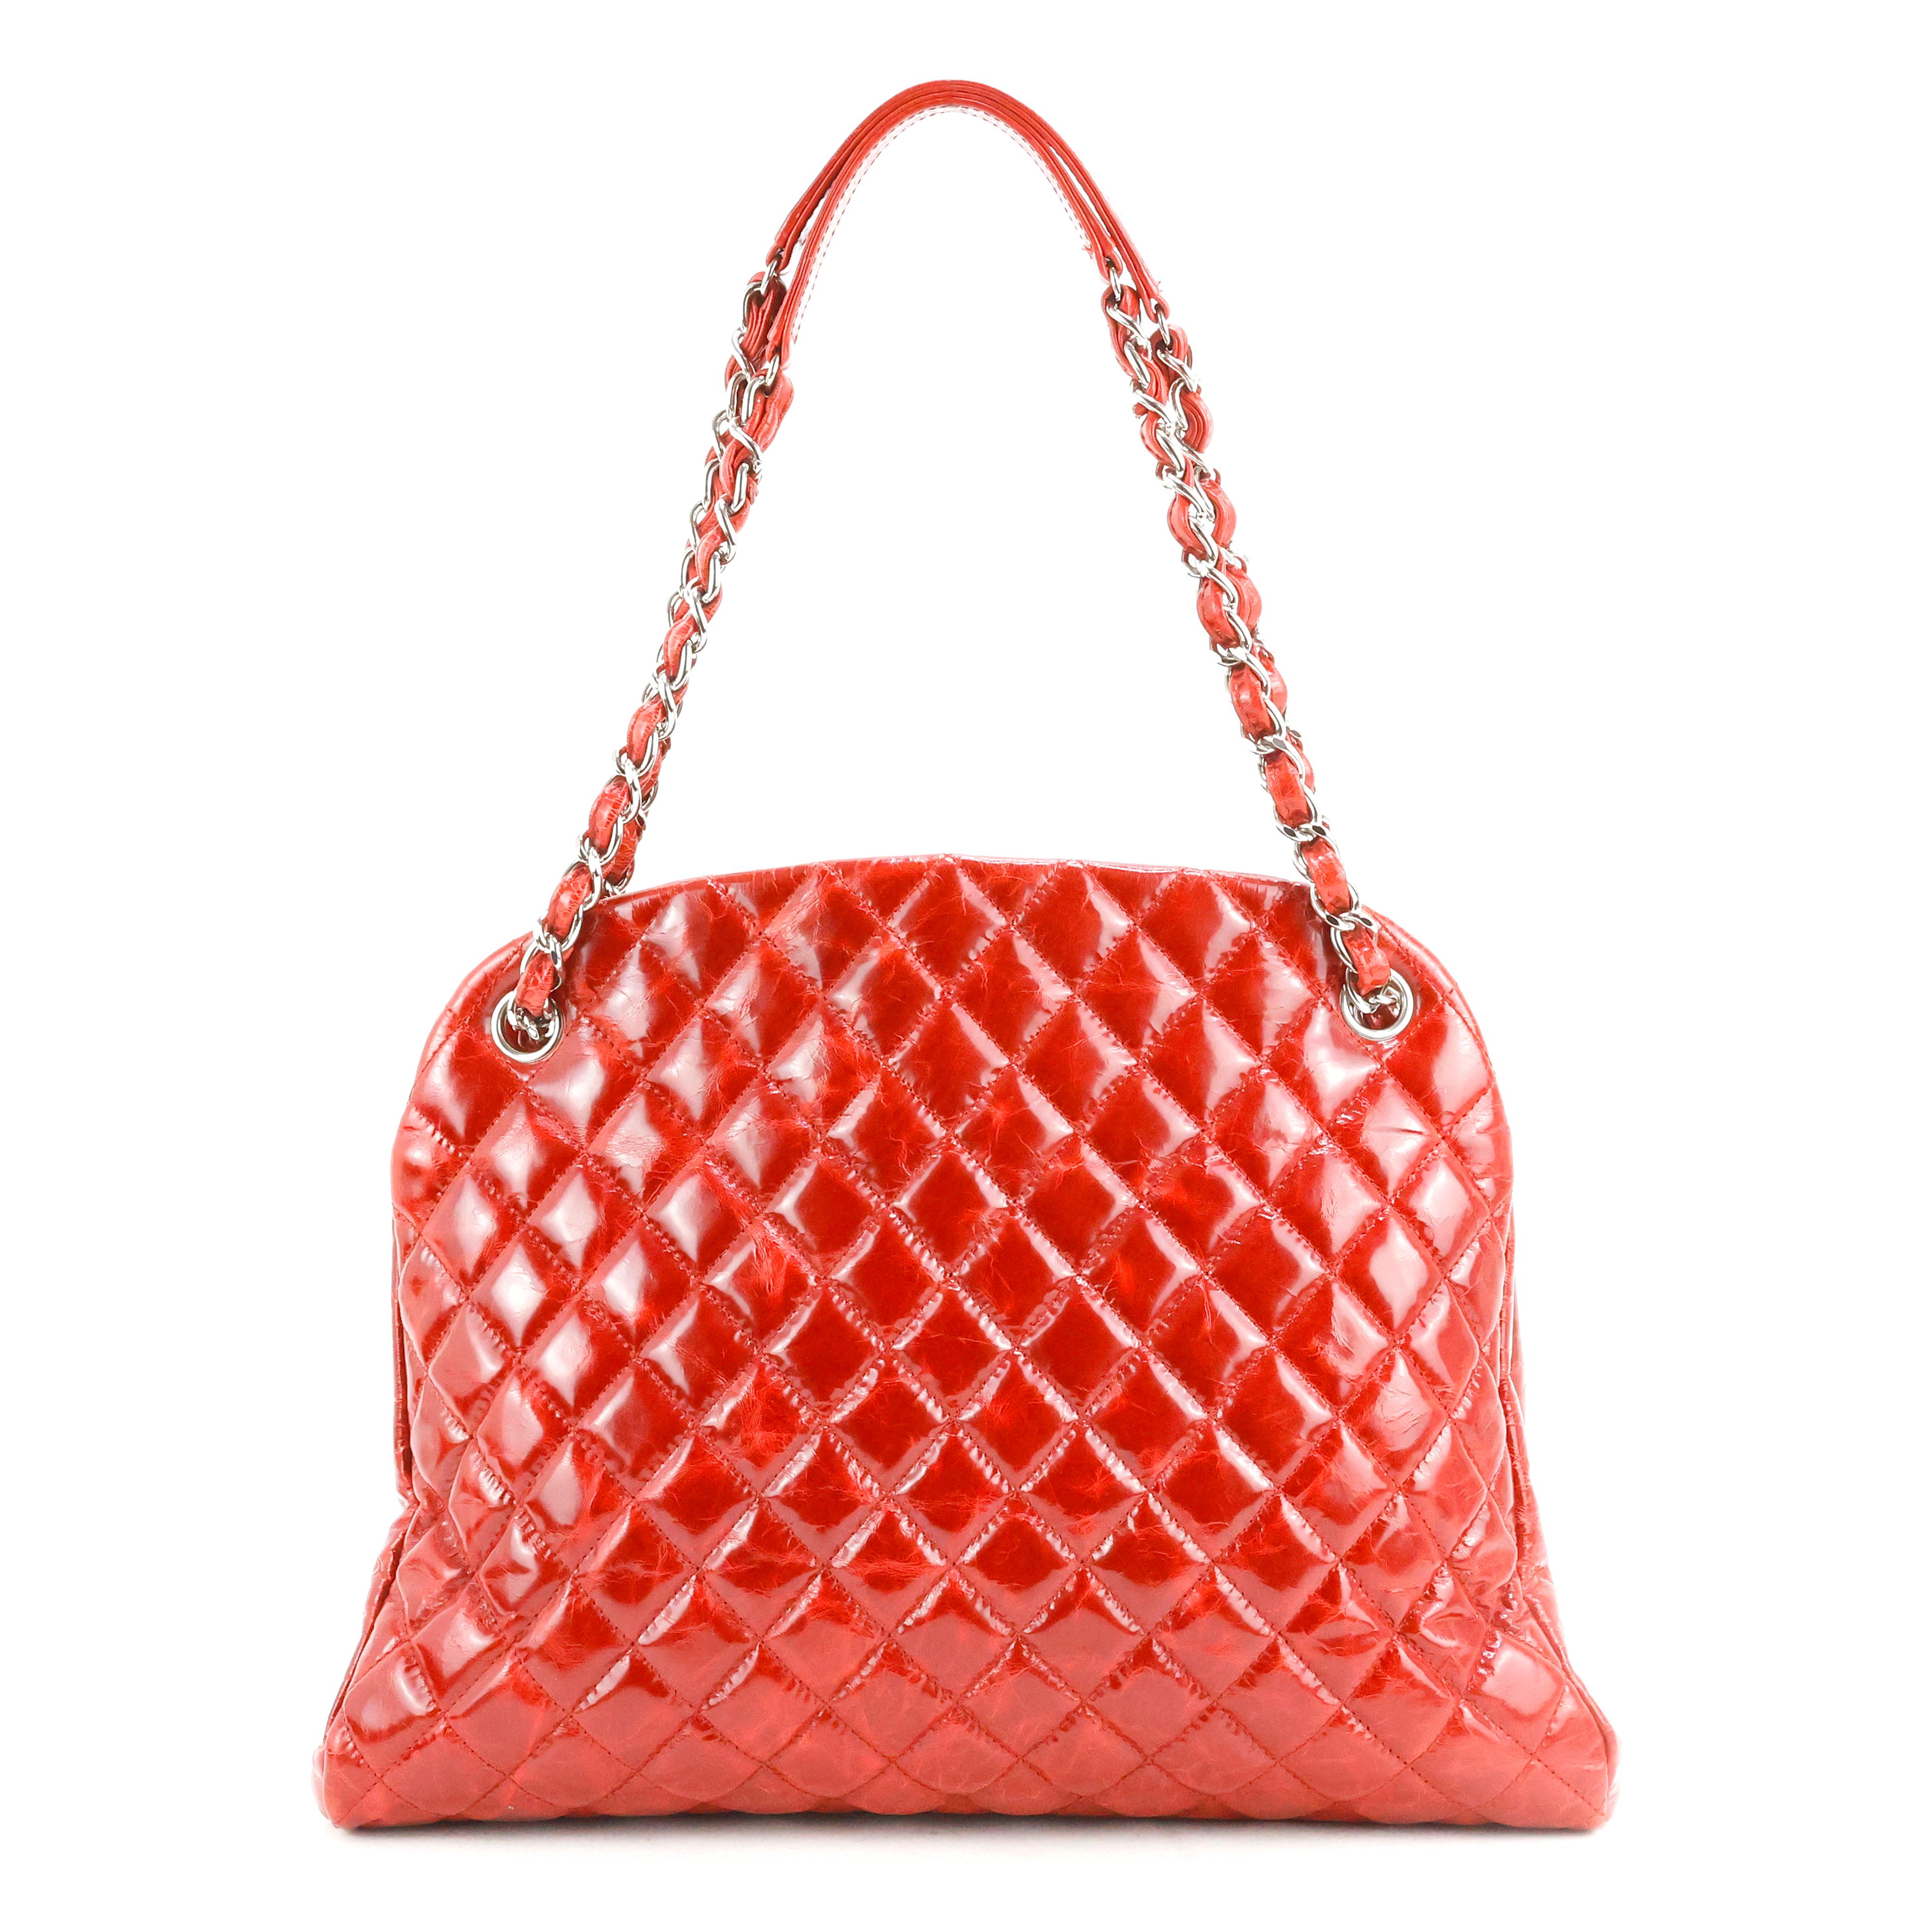 Chanel bag - Chanel Mademoiselle bag in quilted leather color red, silver hardware.

Condition:
Excellent.

Packing/accessories:
Dustbag.

Measurements:
33cm x 26cm x 12cm